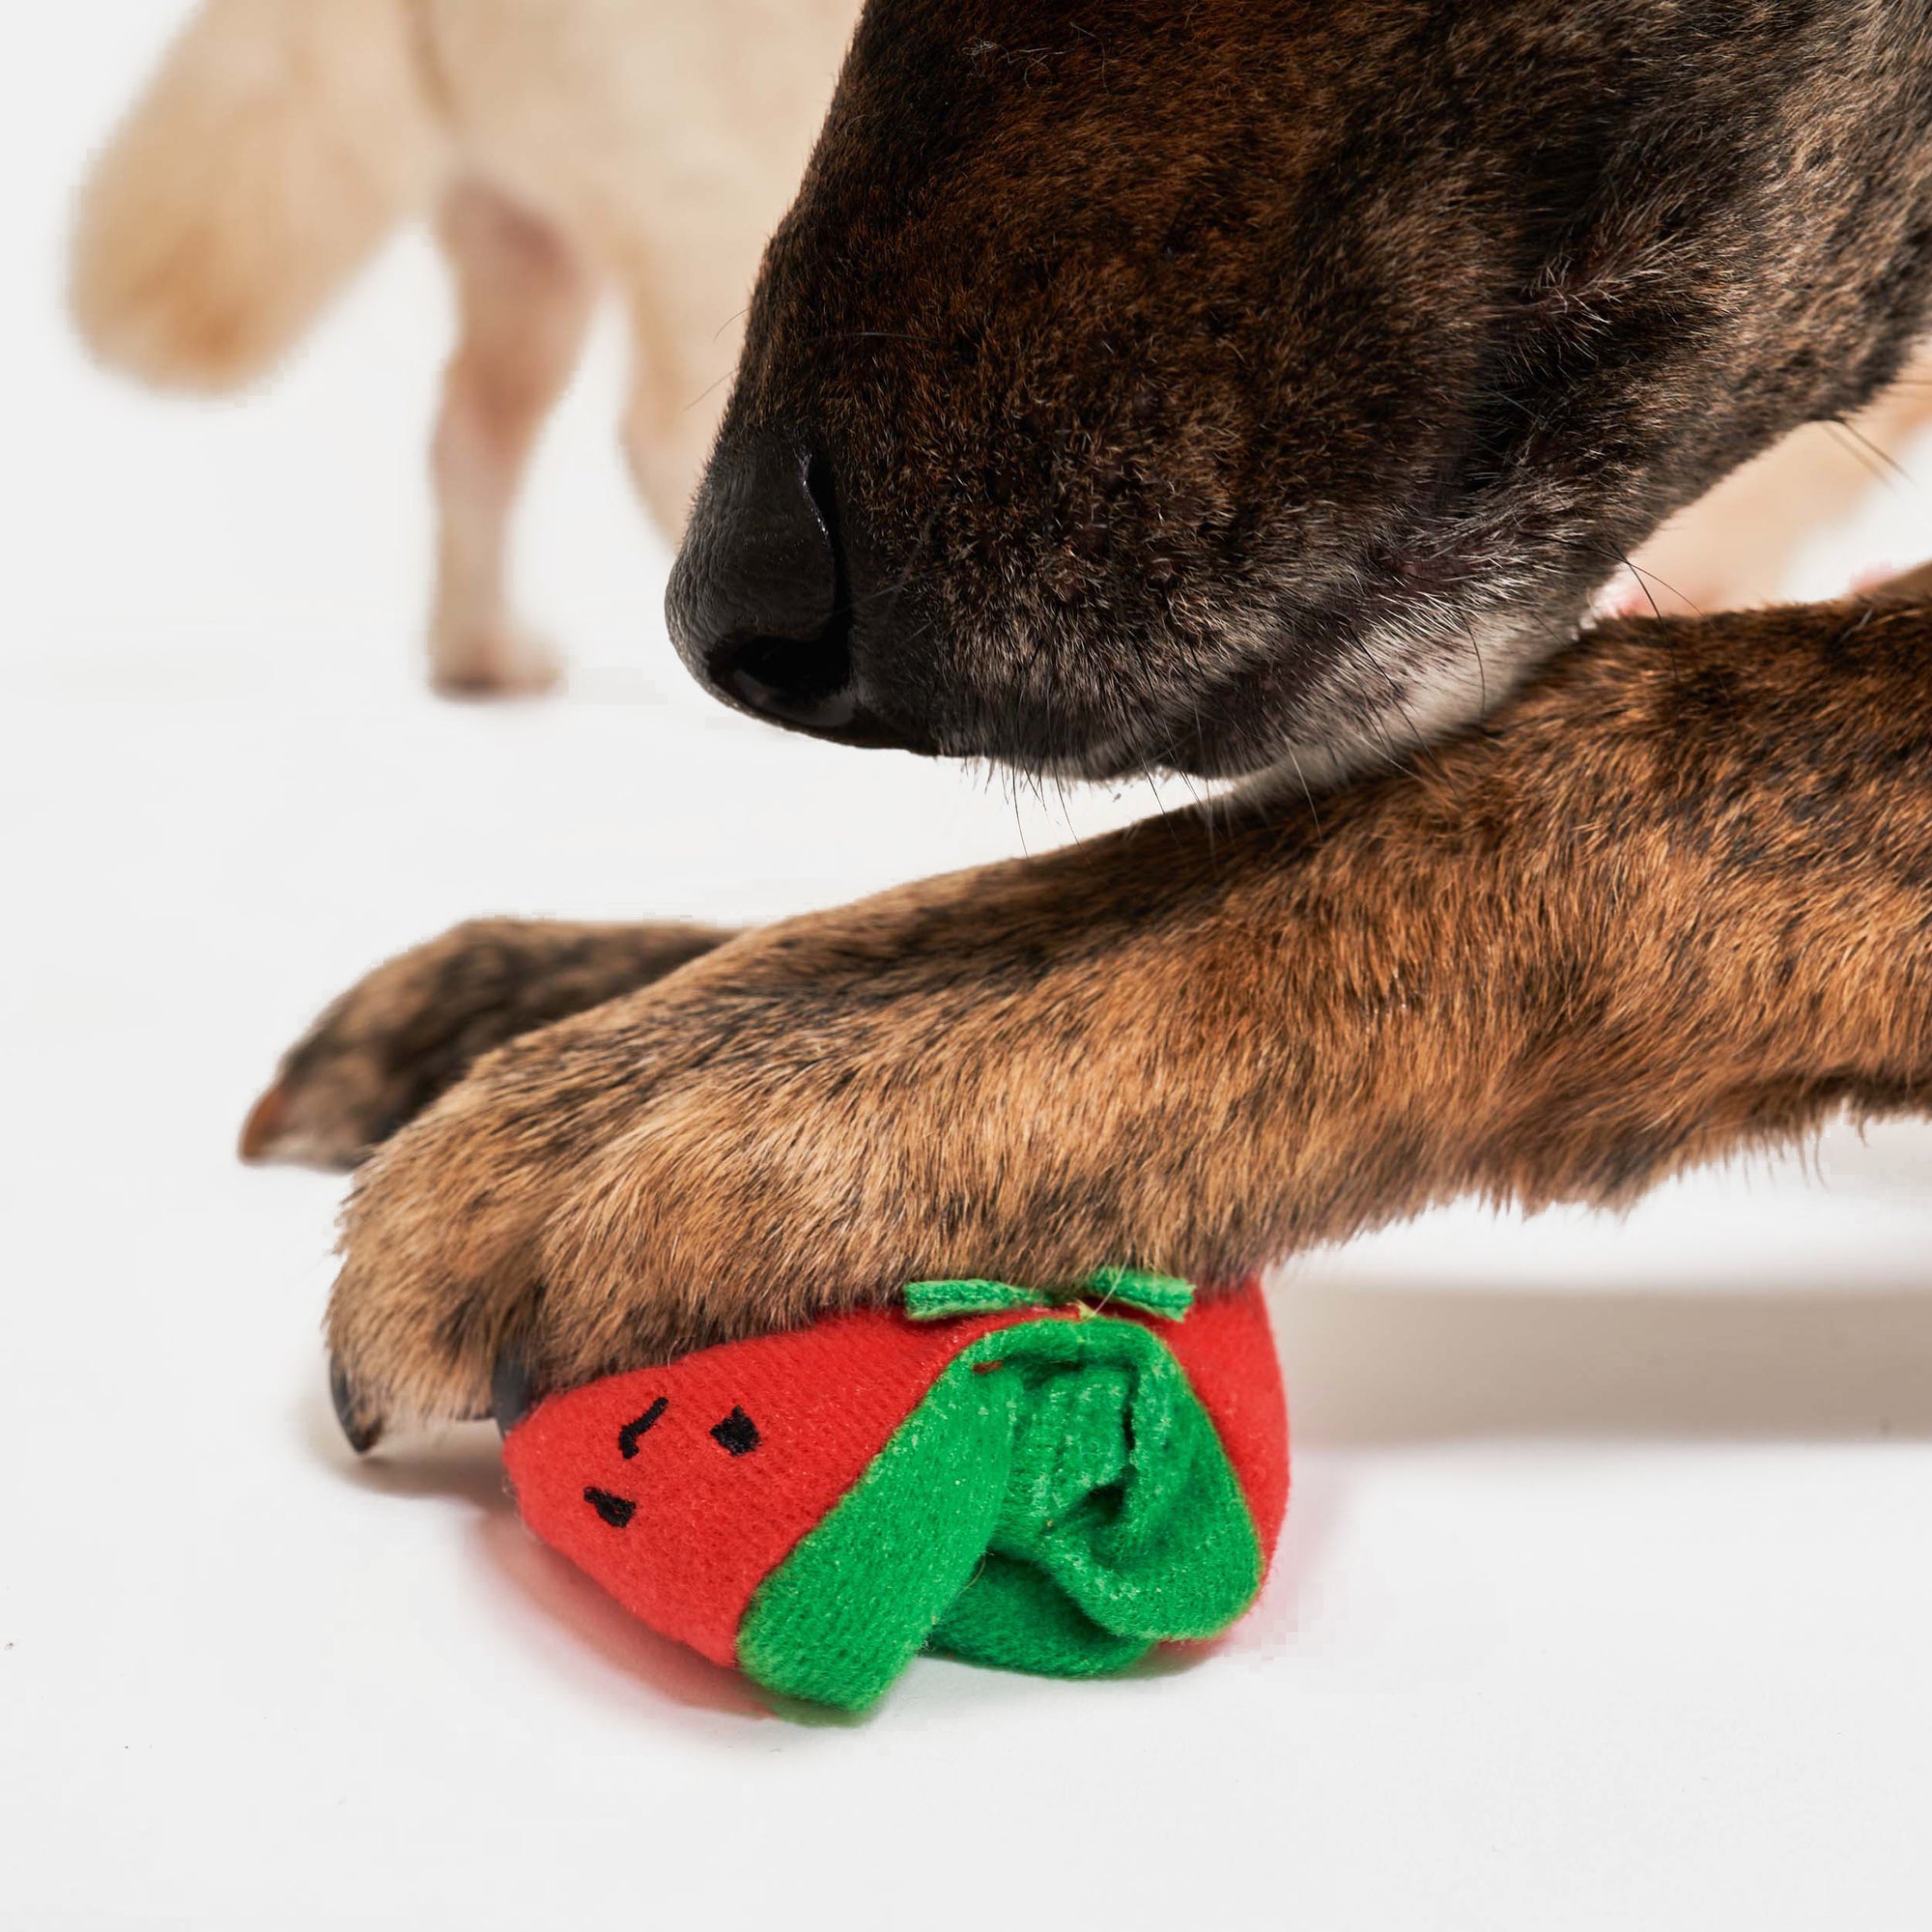 The image is a close-up view capturing a moment where the brindle-coated dog is pressing down on one of the plush tomatoes with its paw. This action could be part of a play sequence where the dog is manipulating its toy, a behavior that is often seen in dogs as they engage with their environment and playthings. The focus on the dog's paw and the tomato creates a dynamic and intimate snapshot of everyday pet play.